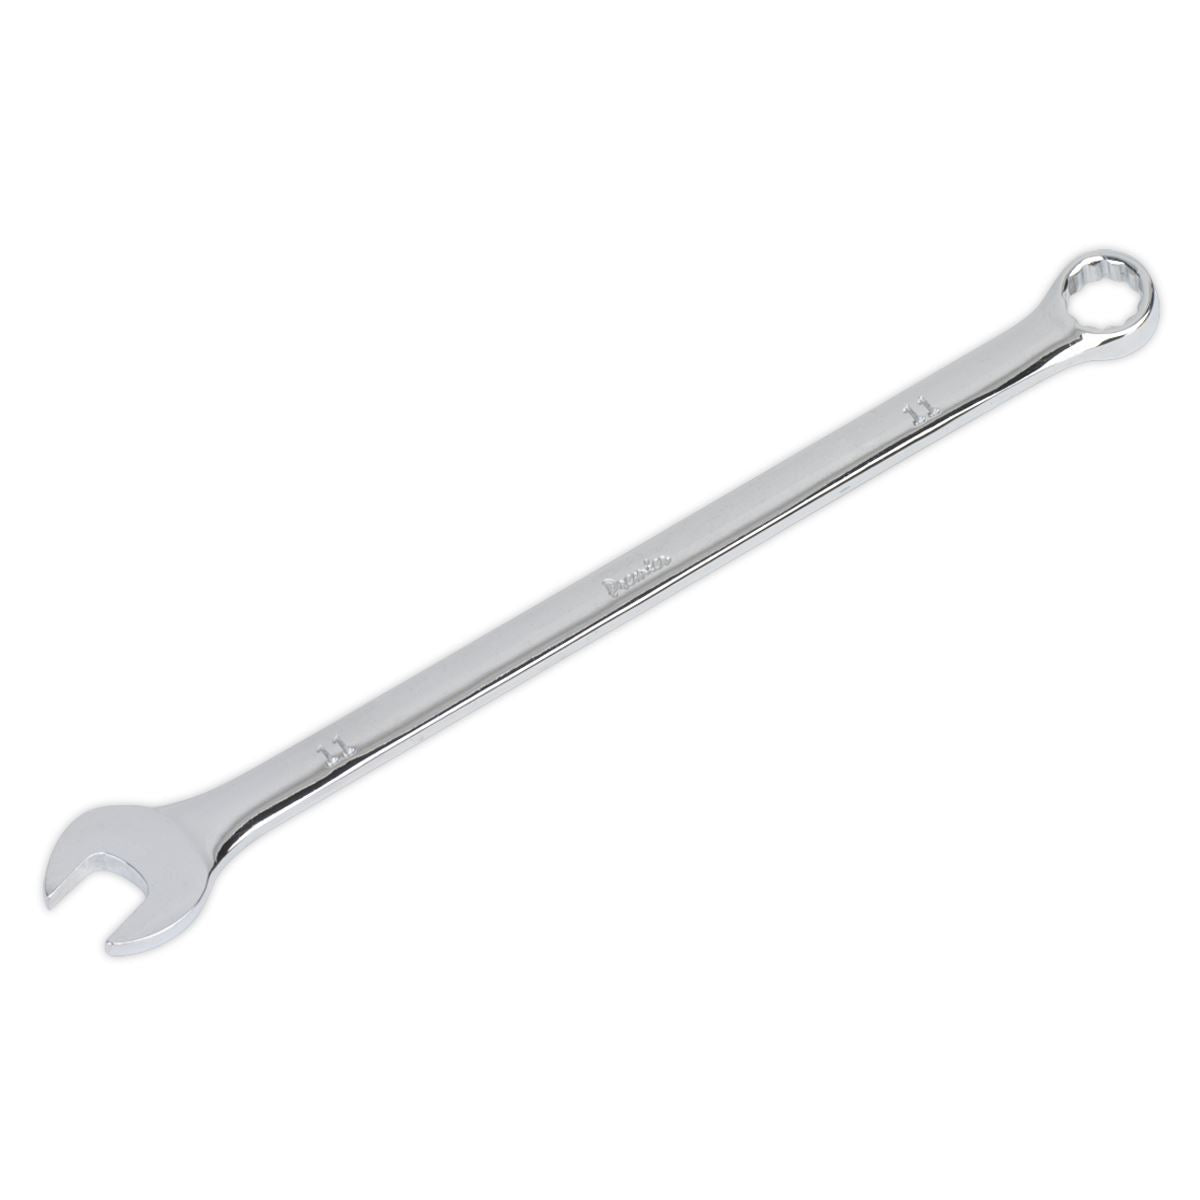 Sealey Combination Spanner Extra-Long 11mm Premier WallDrive Wrench Garage Tool